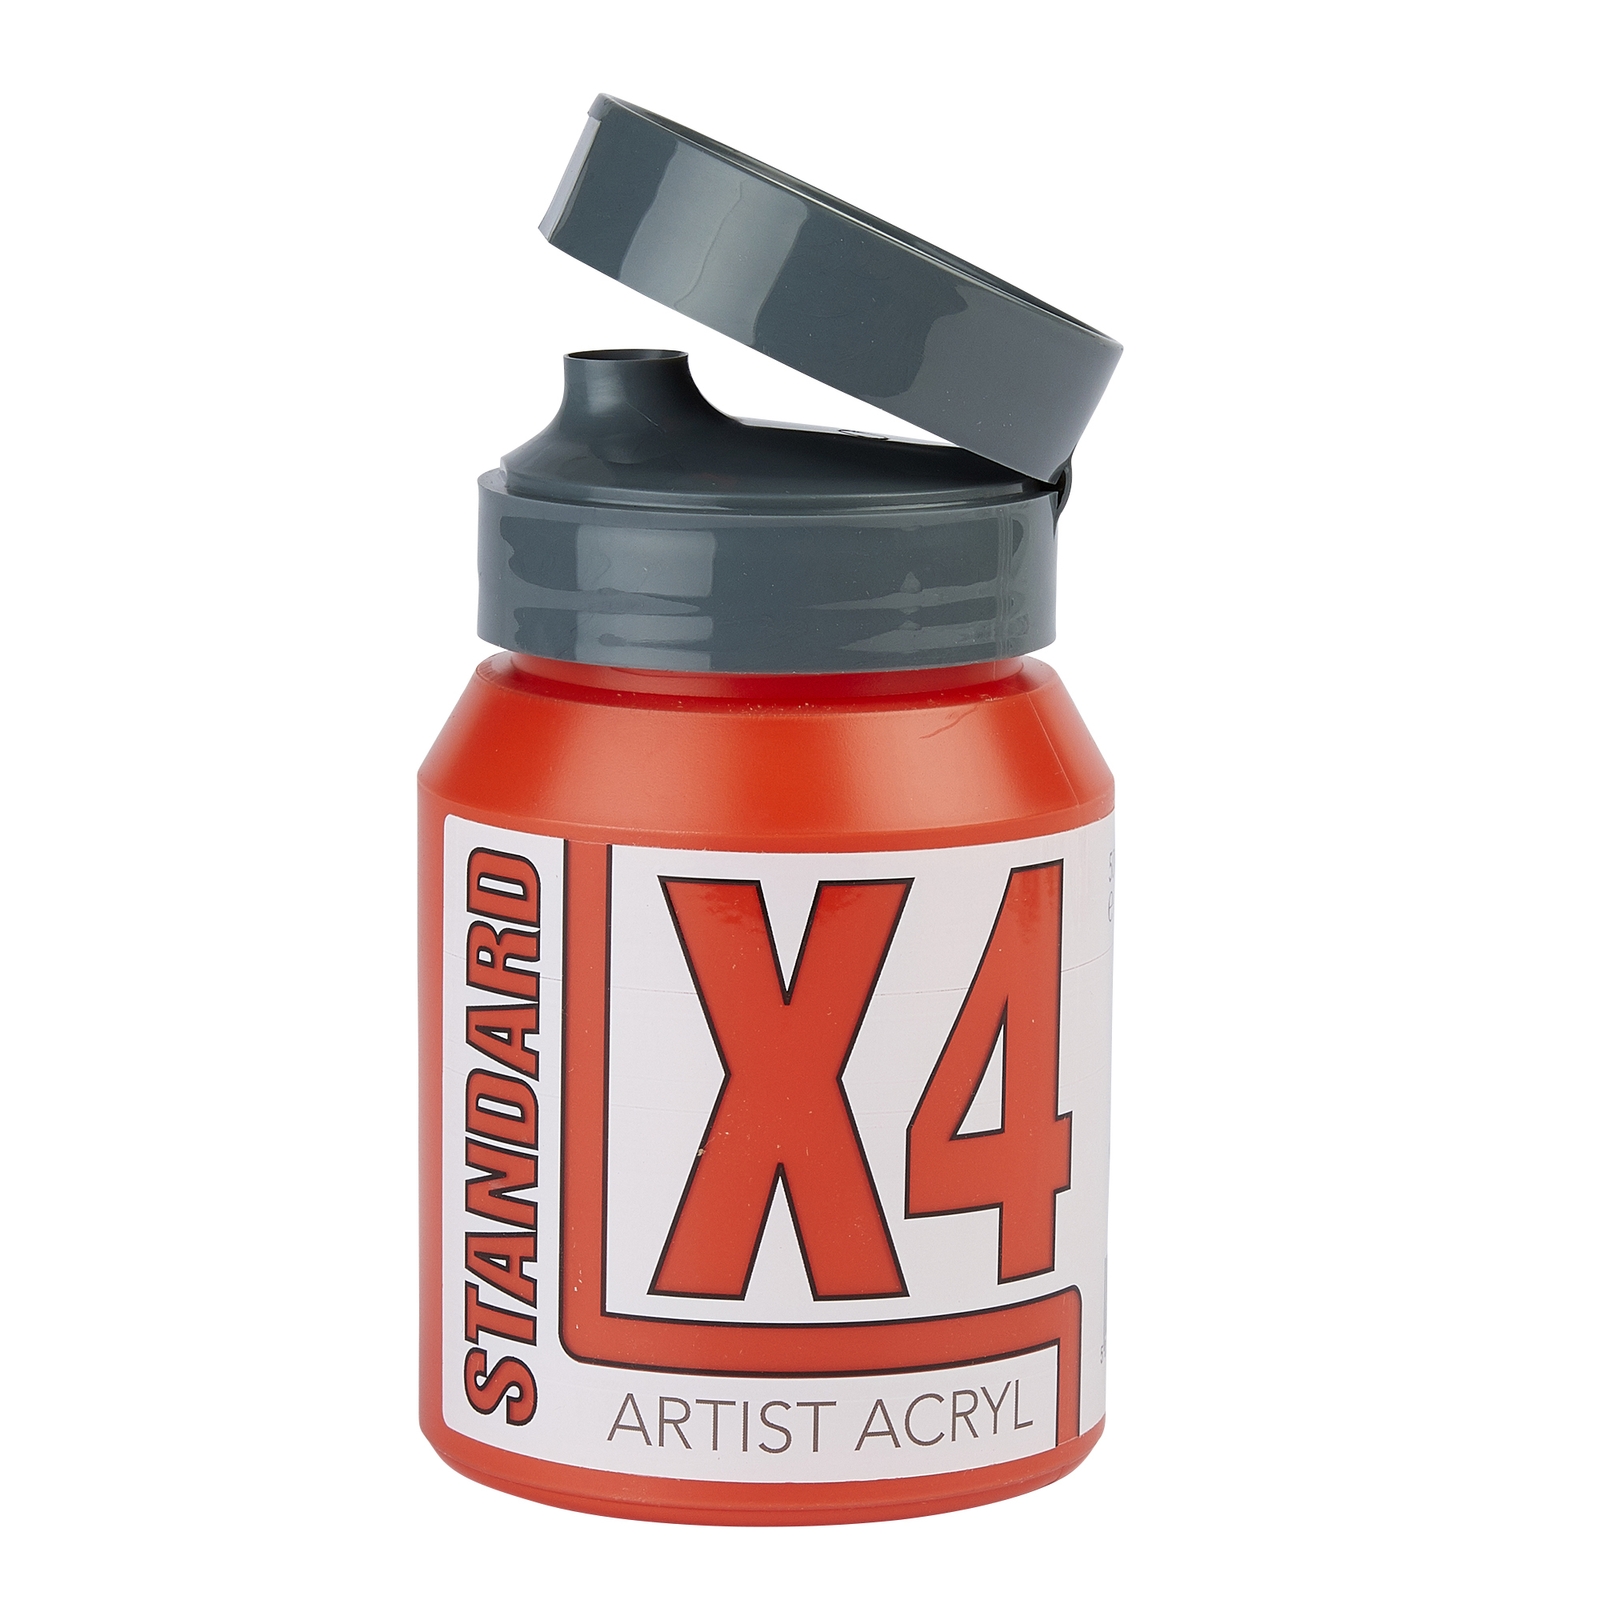 Specialist Crafts X4 Standard Naphthol Red Light Acryl/Acrylic Paint - 500ml - Each